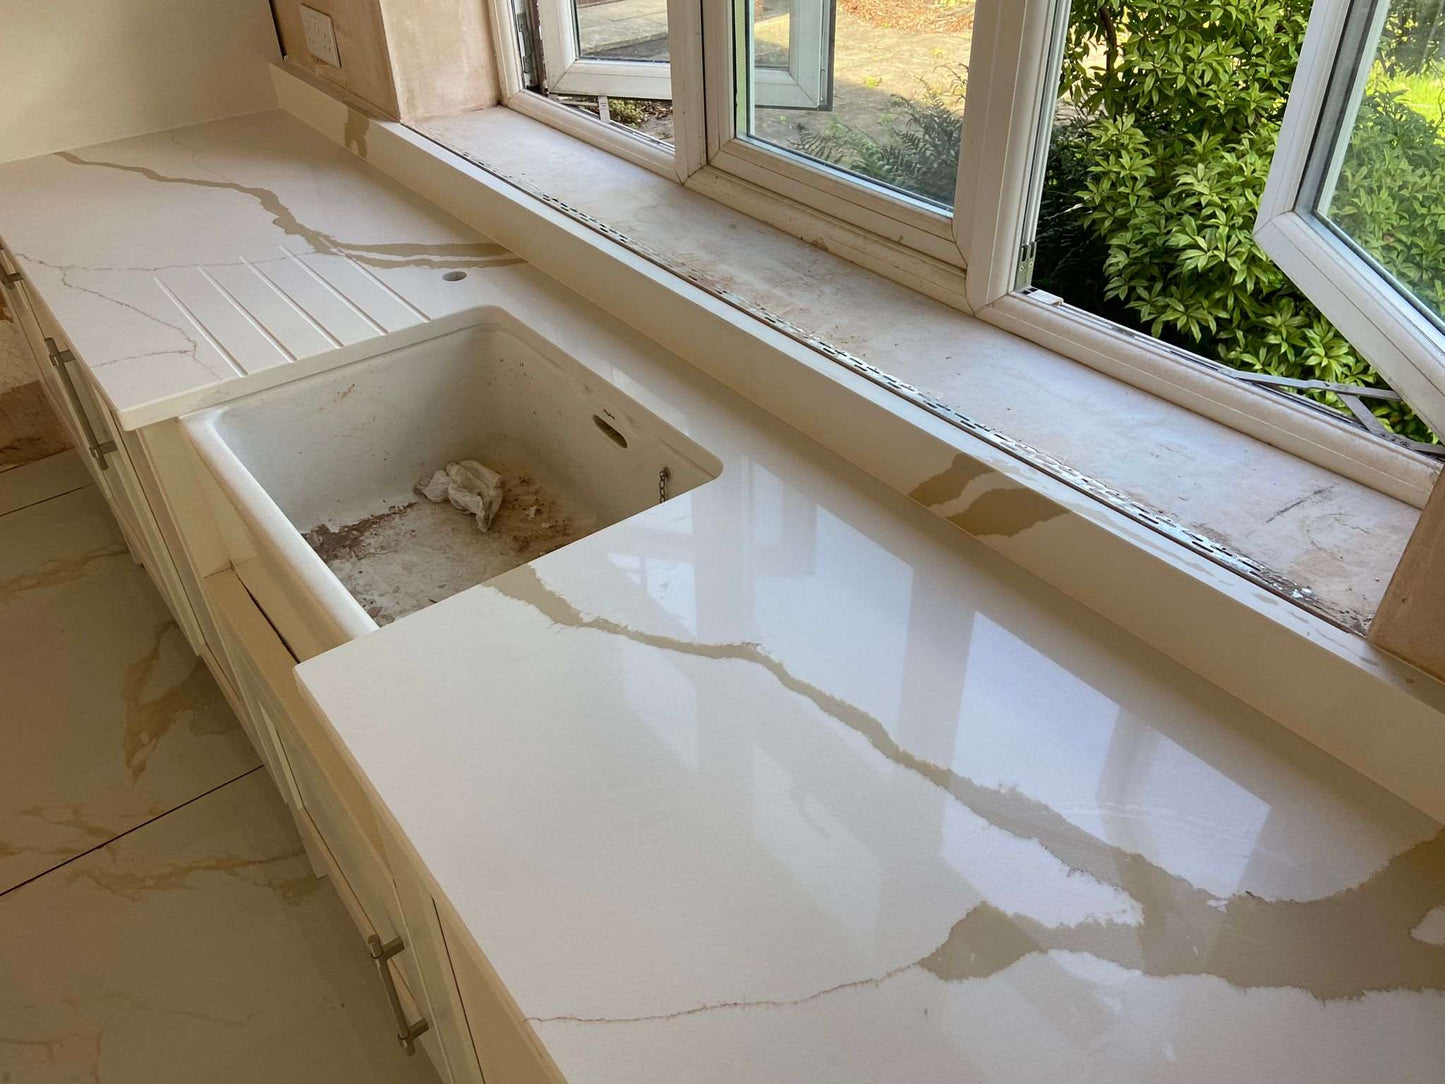 Calacatta Aurous quartz kitchen worktops with a cool white base with vivid gold and subtle grey veining intermixed elegantly.